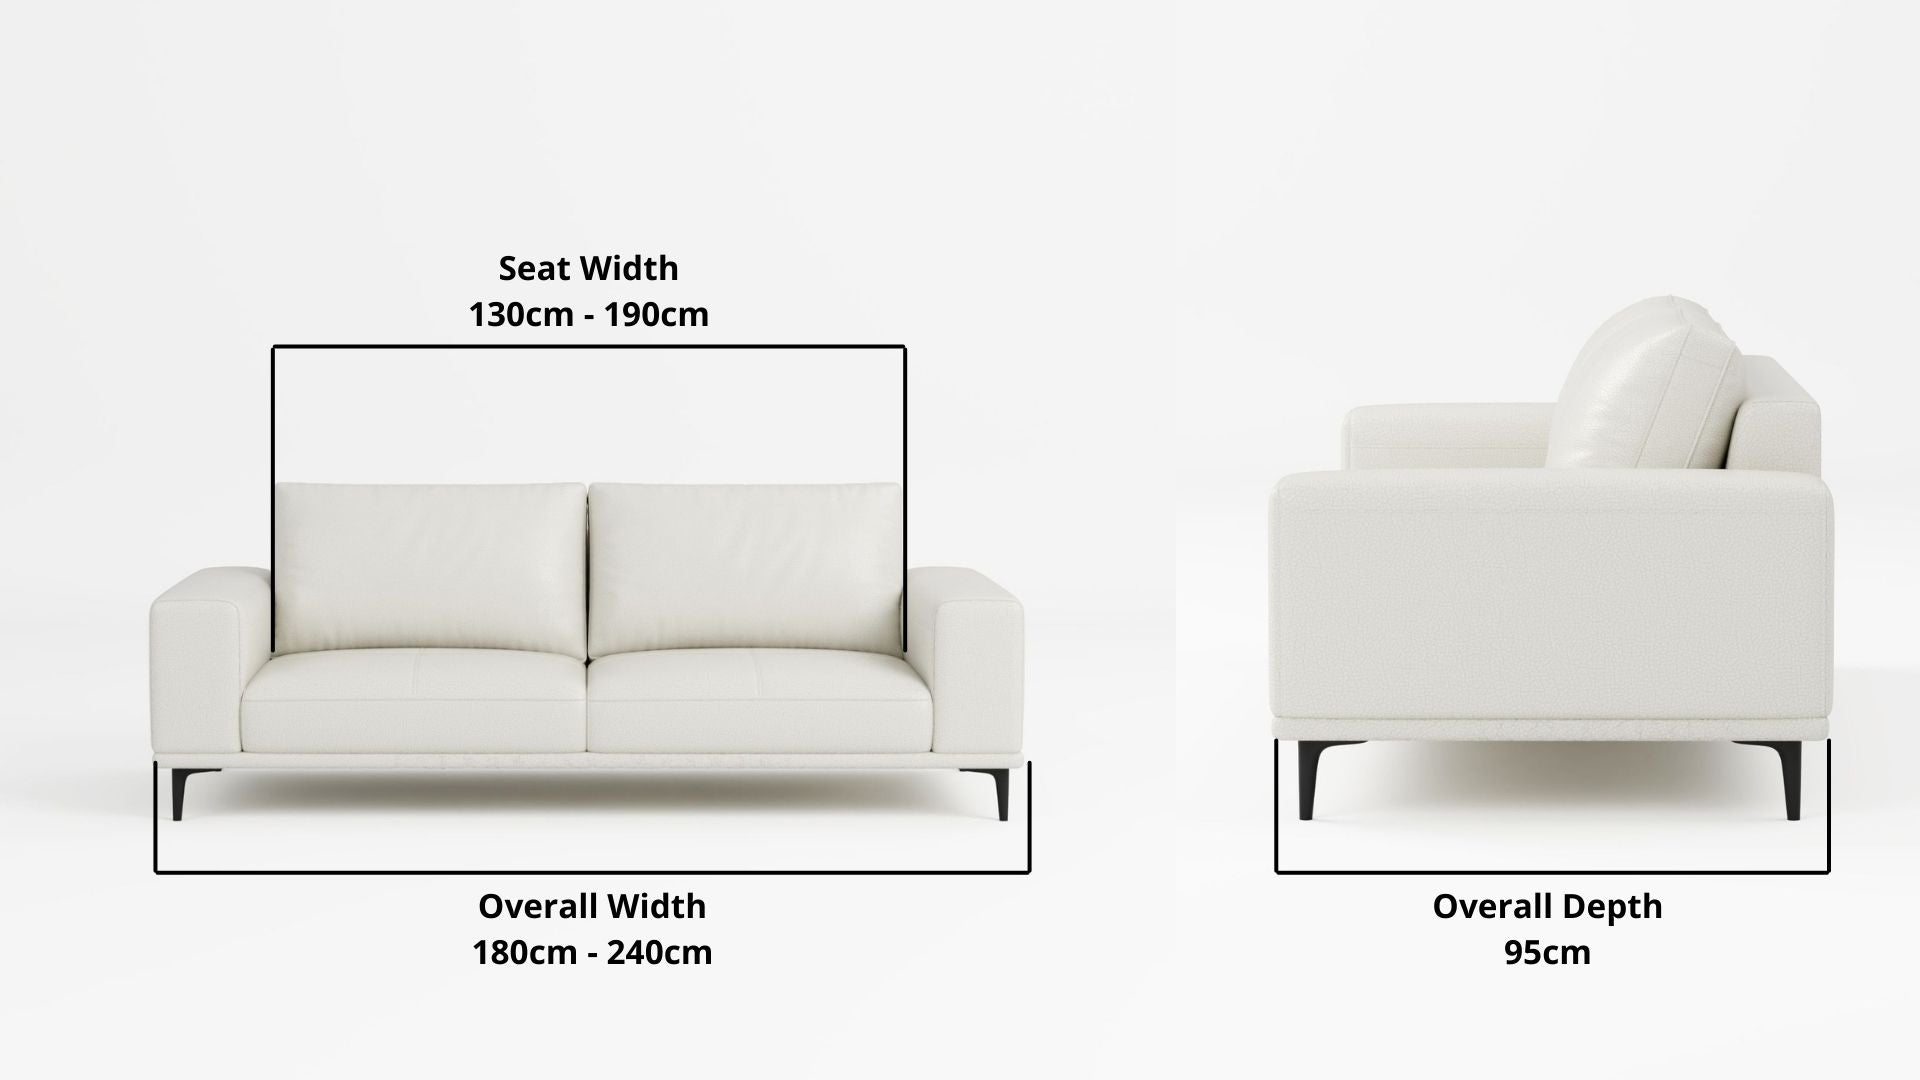 Details the key dimensions in terms of overall width, overall depth and seat width for Calm Half Leather Sofa